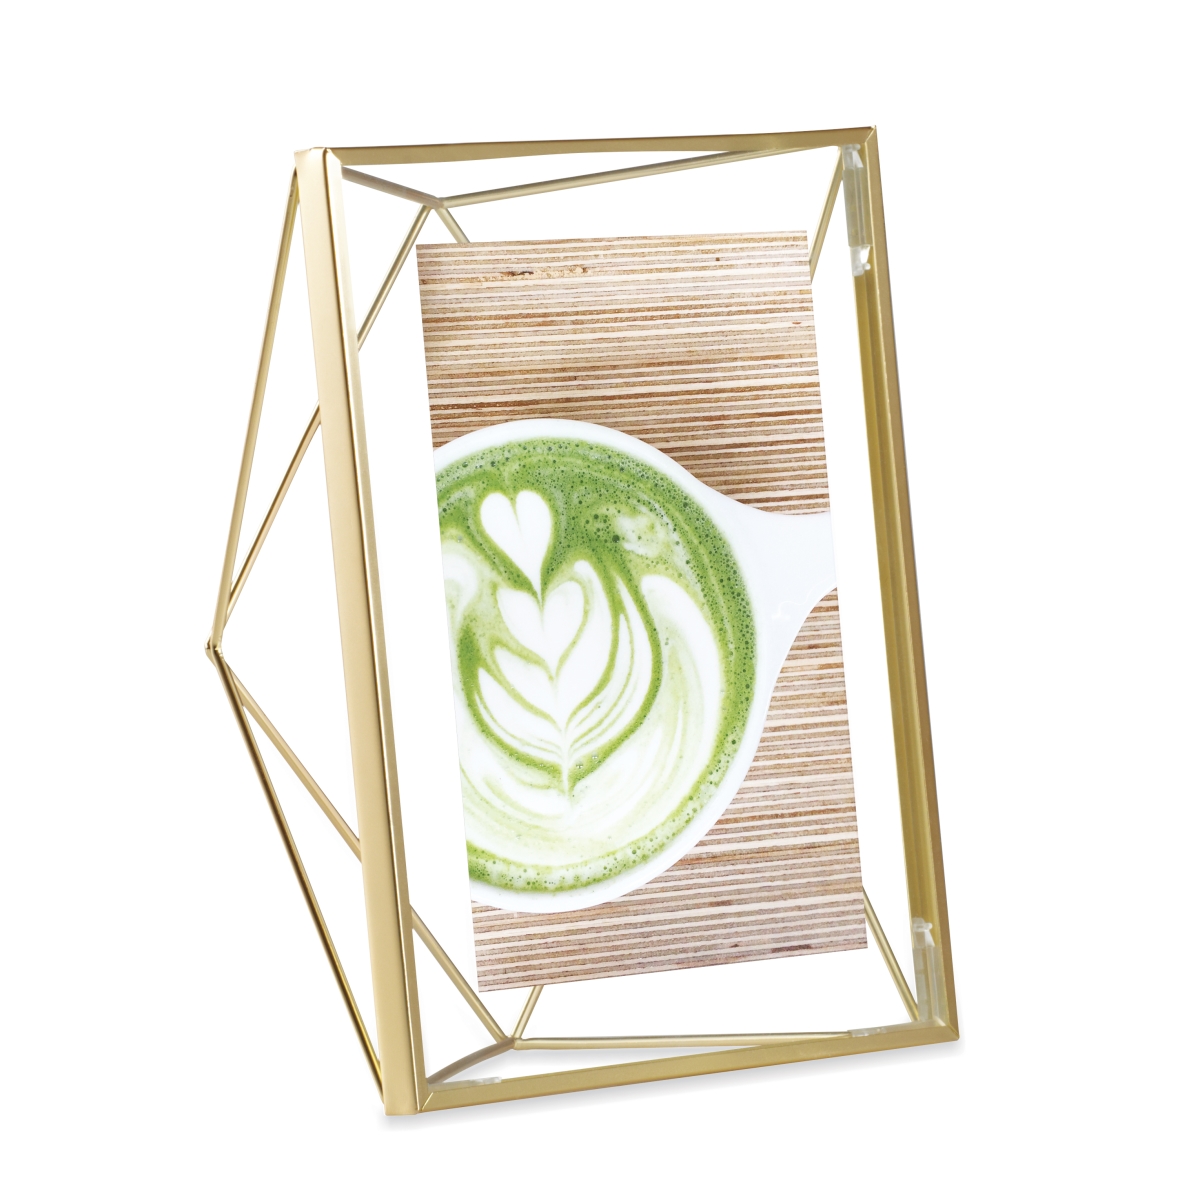 313015-221 5 X 7 In. Prisma Picture Frame Floating Wall Photo Display - Matte Brass